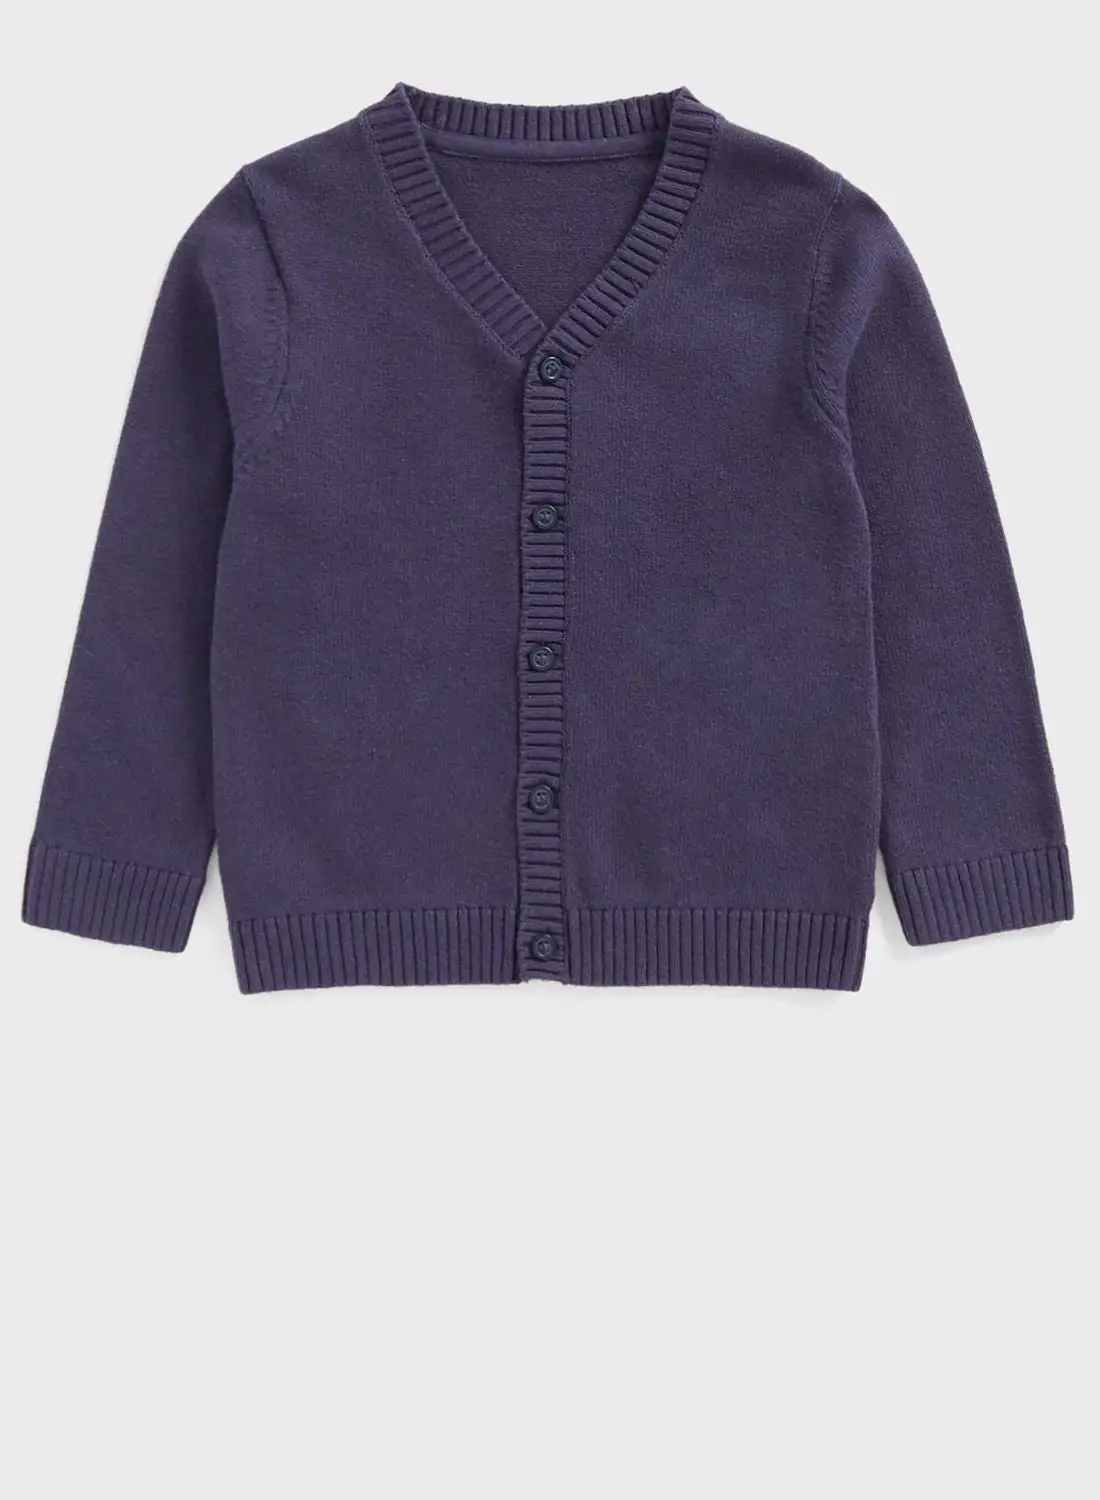 mothercare Kids Knitted V-Neck Cardigan